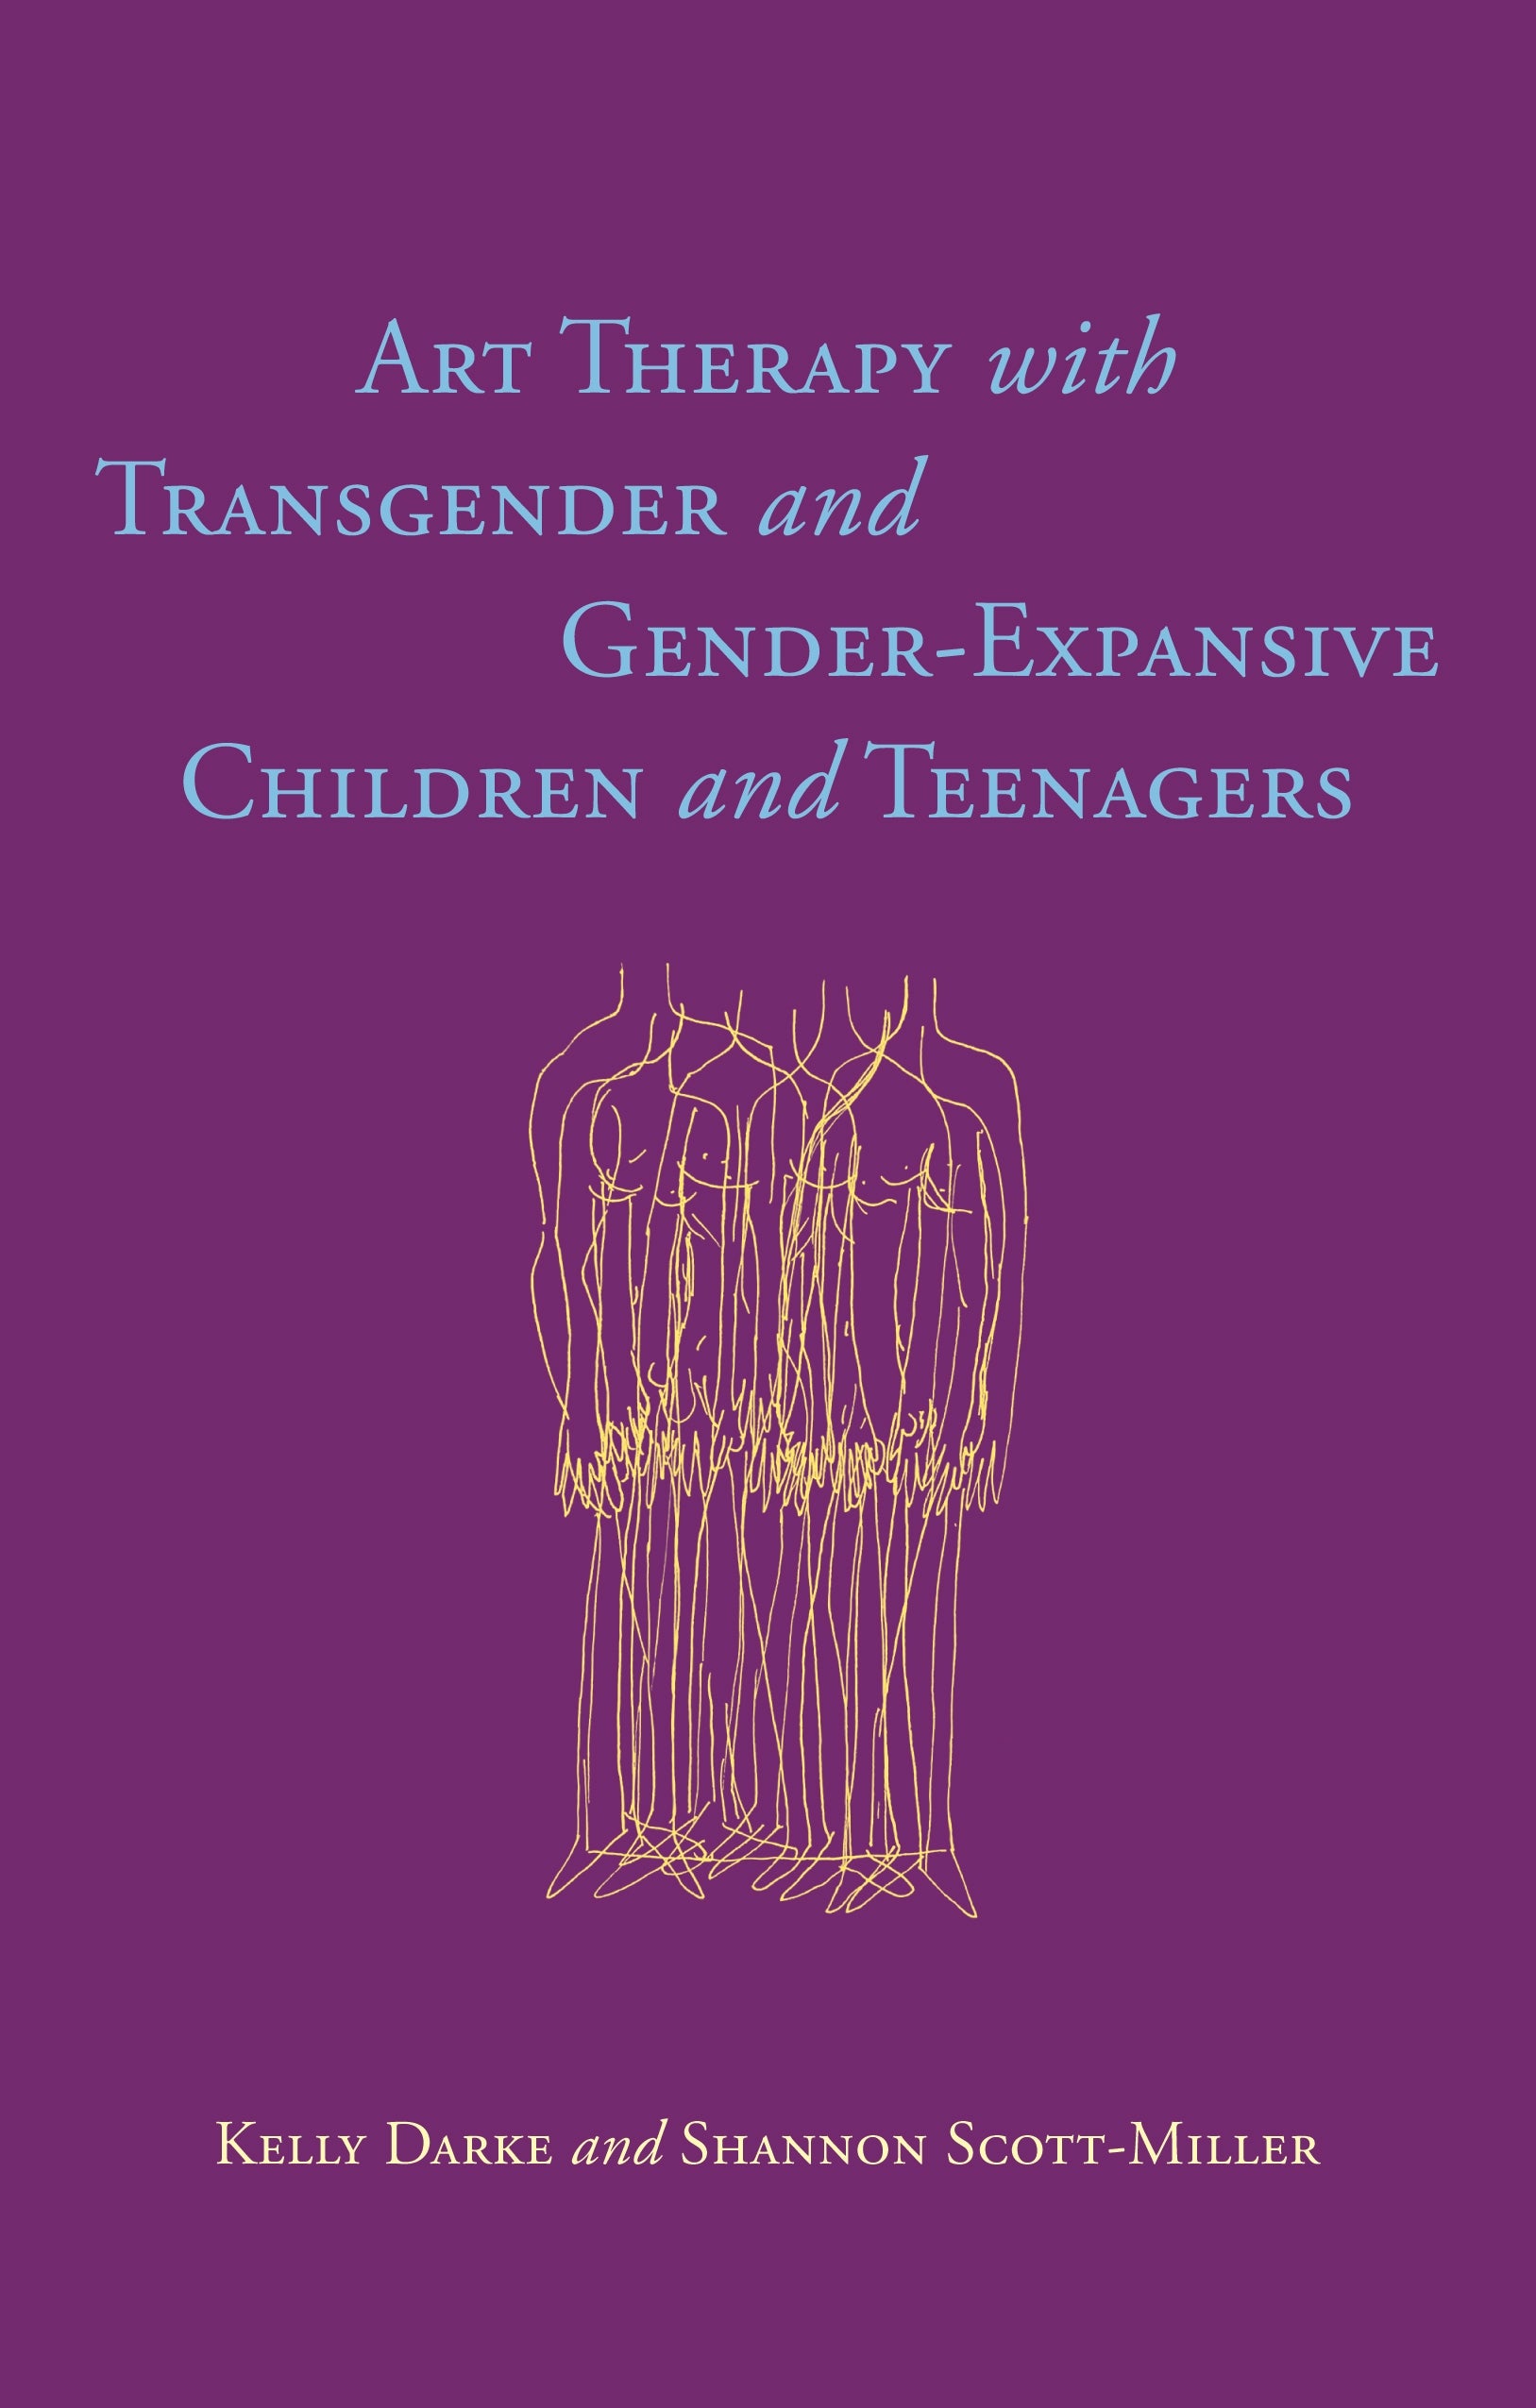 Art Therapy with Transgender and Gender-Expansive Children and Teenagers by Kelly Darke, Shannon Scott-Miller